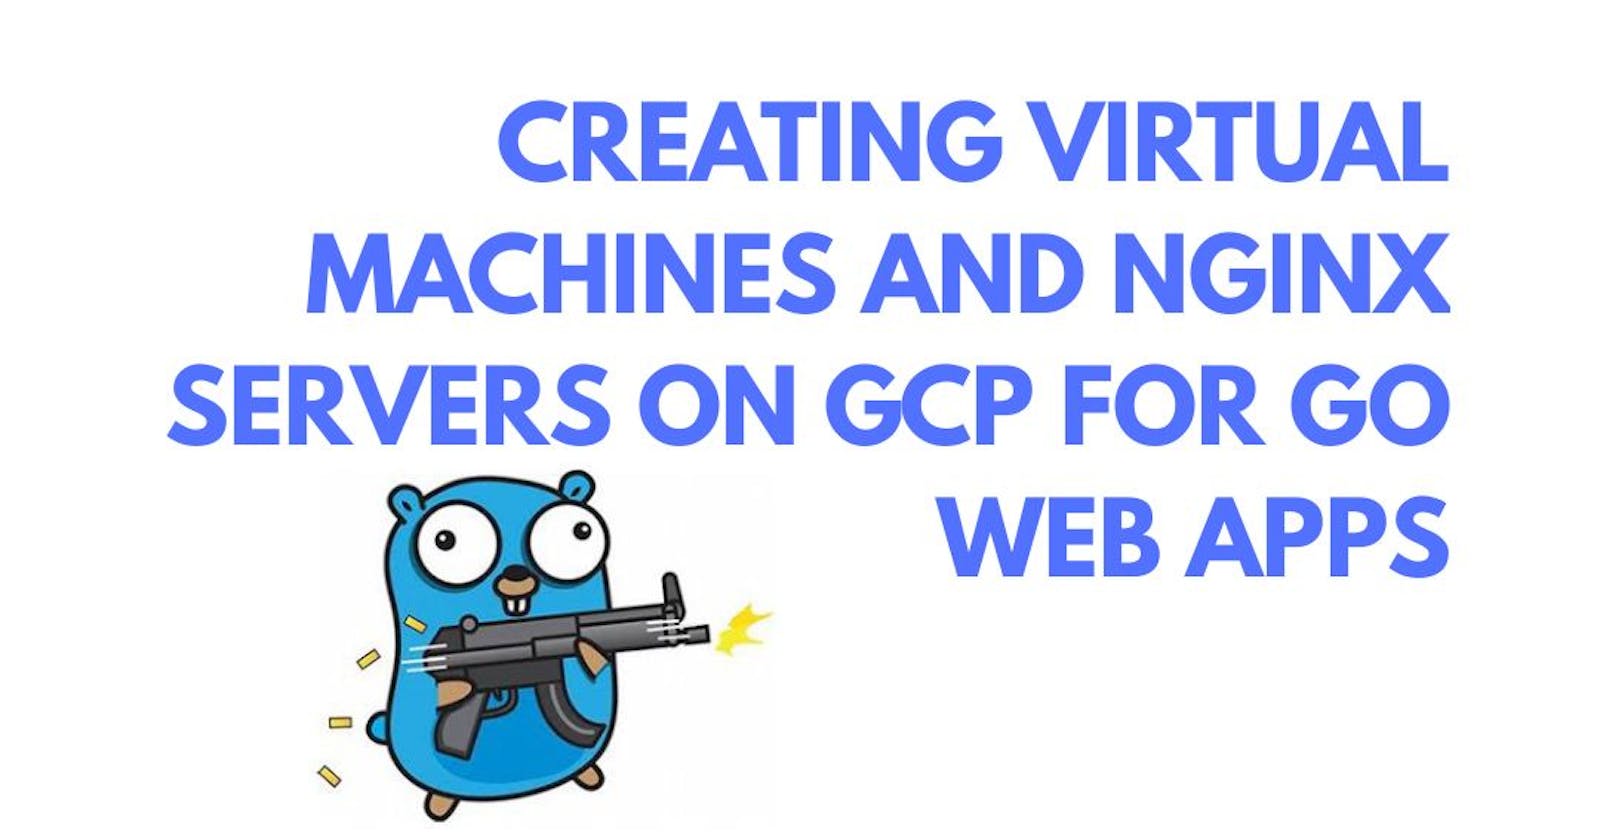 Creating Virtual Machines and NGINX Servers on Google Cloud Platform for Go Web Apps